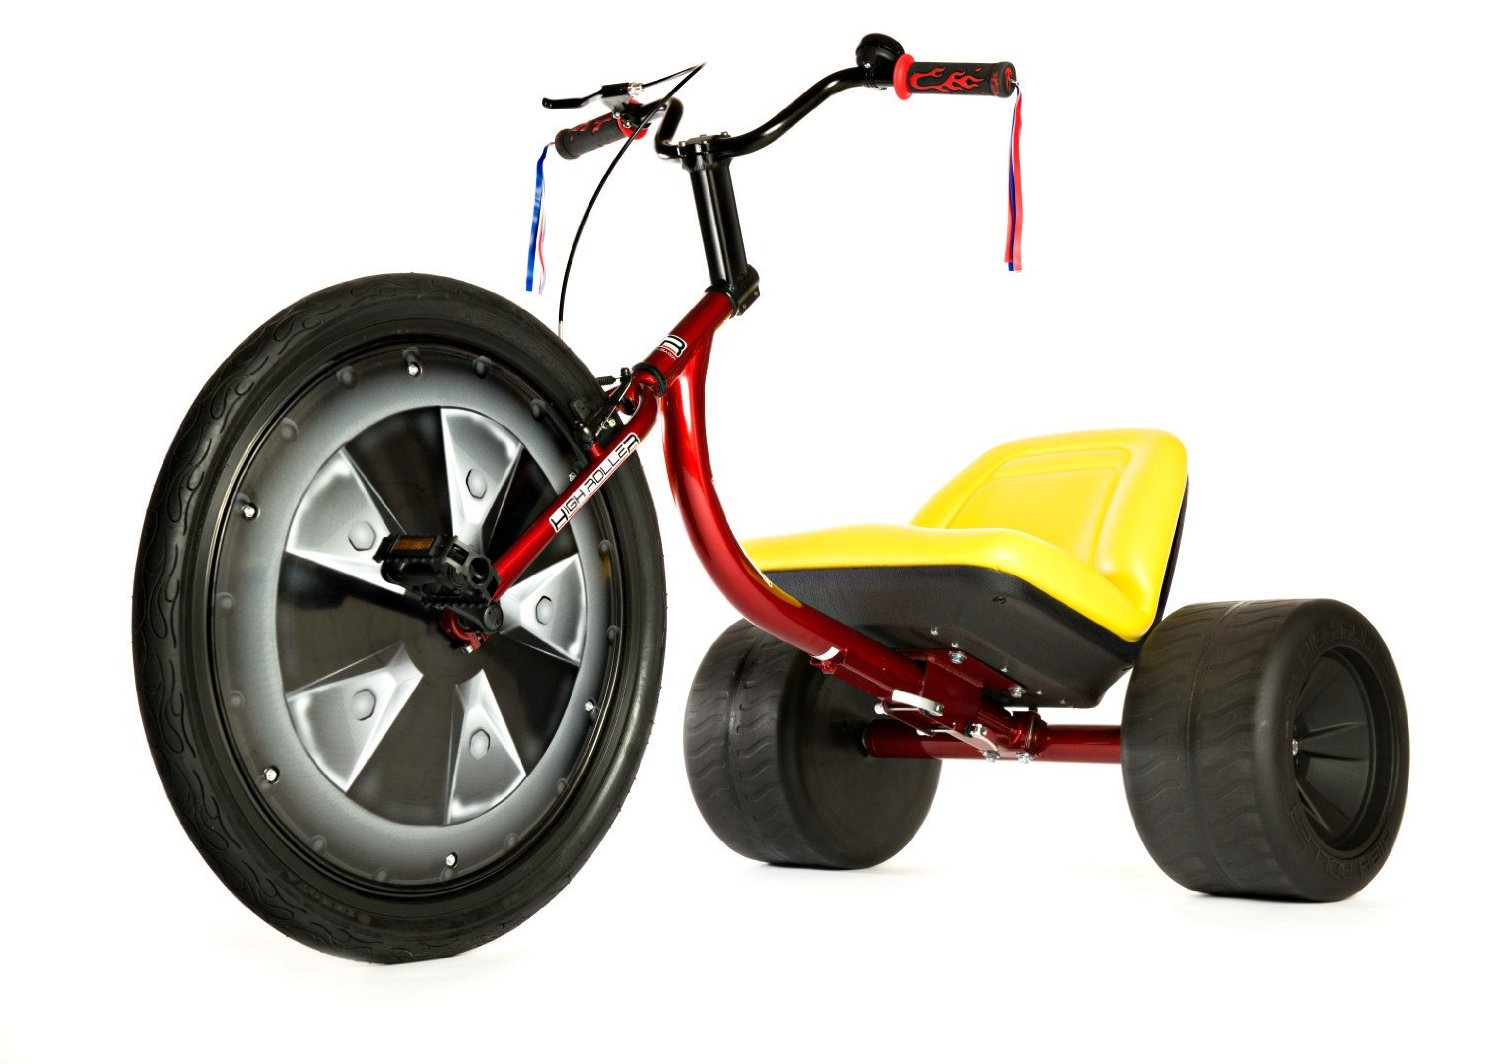 Does The World Really Need An Adult-Sized Big Wheel?